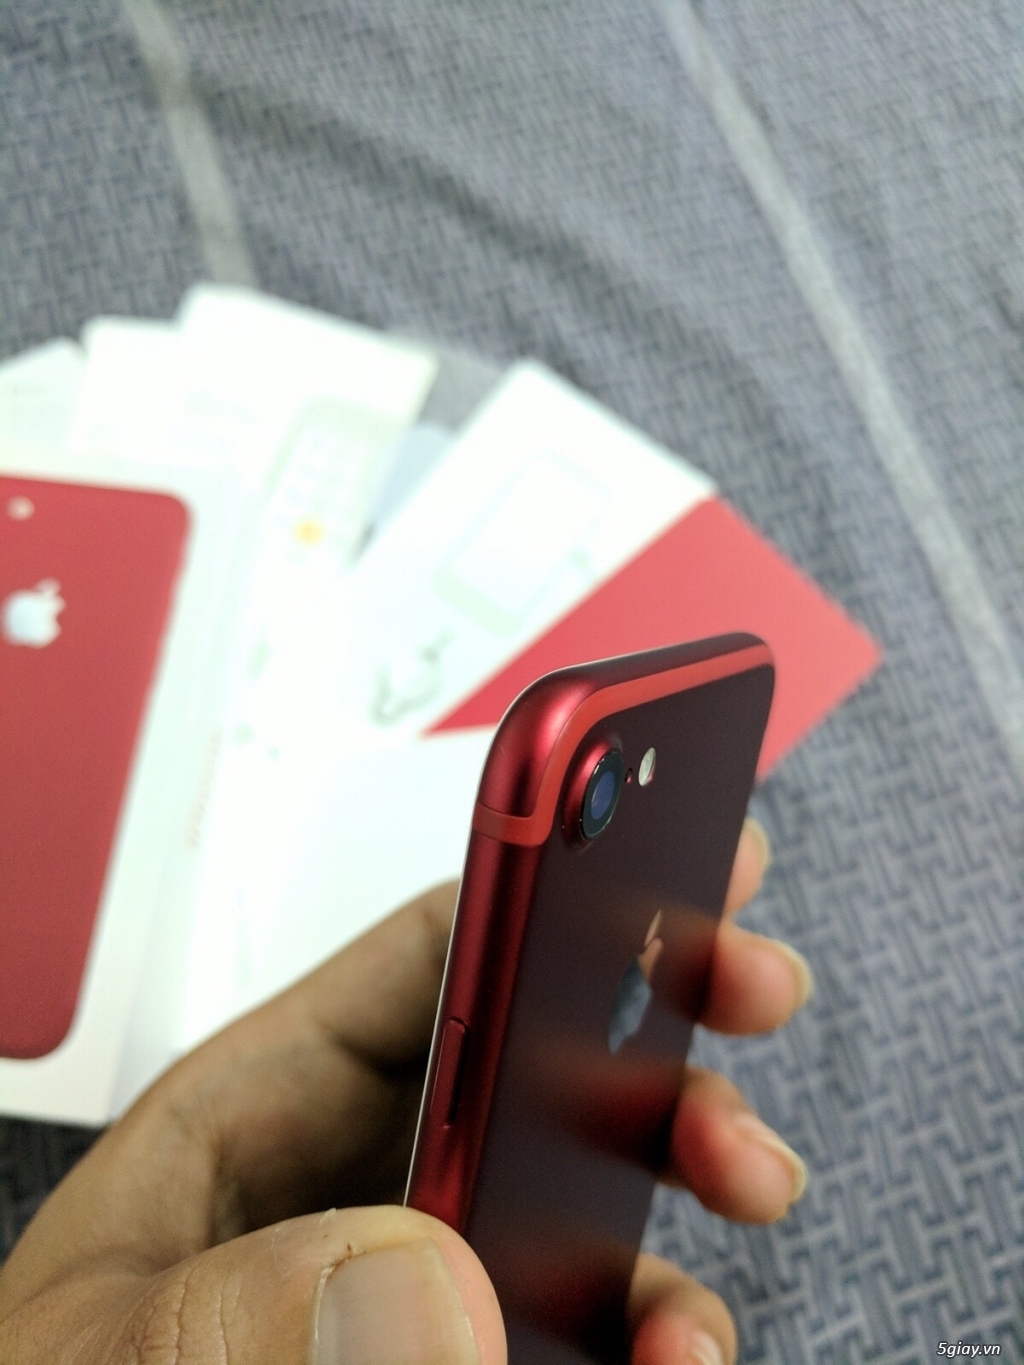 Iphone 7 - Red - 128Gb - Like new - 99% - 10